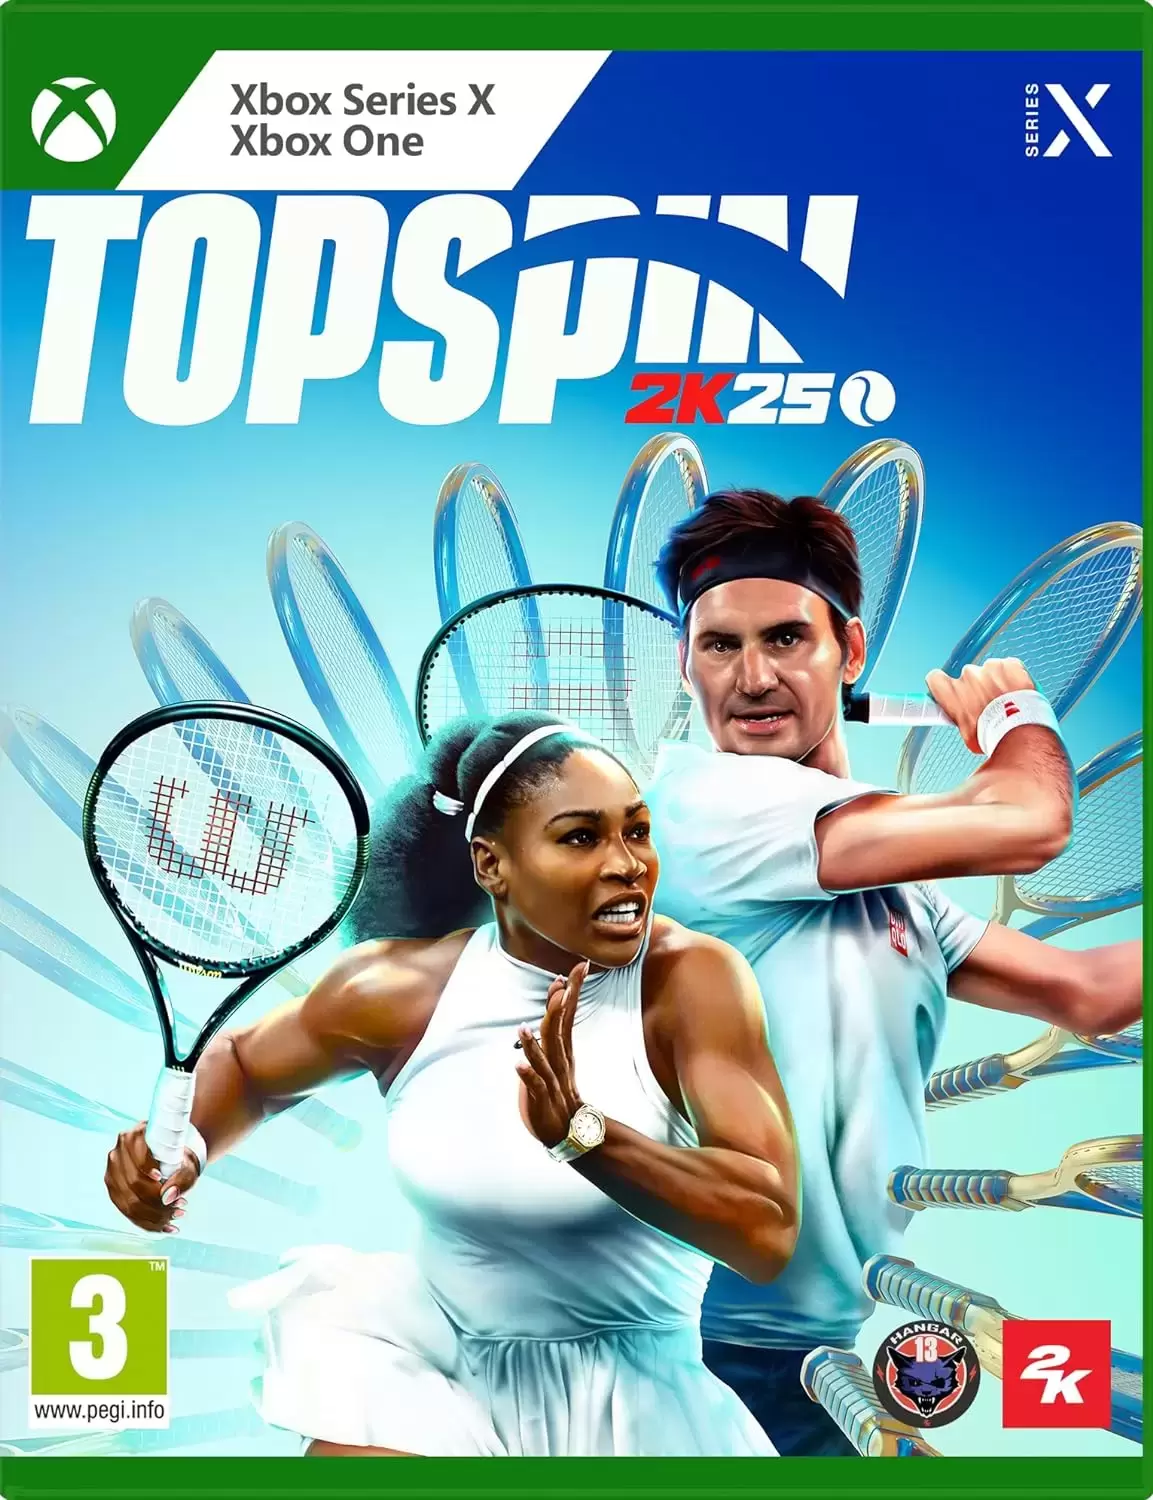 XBOX One Games - TopSpin 2K25